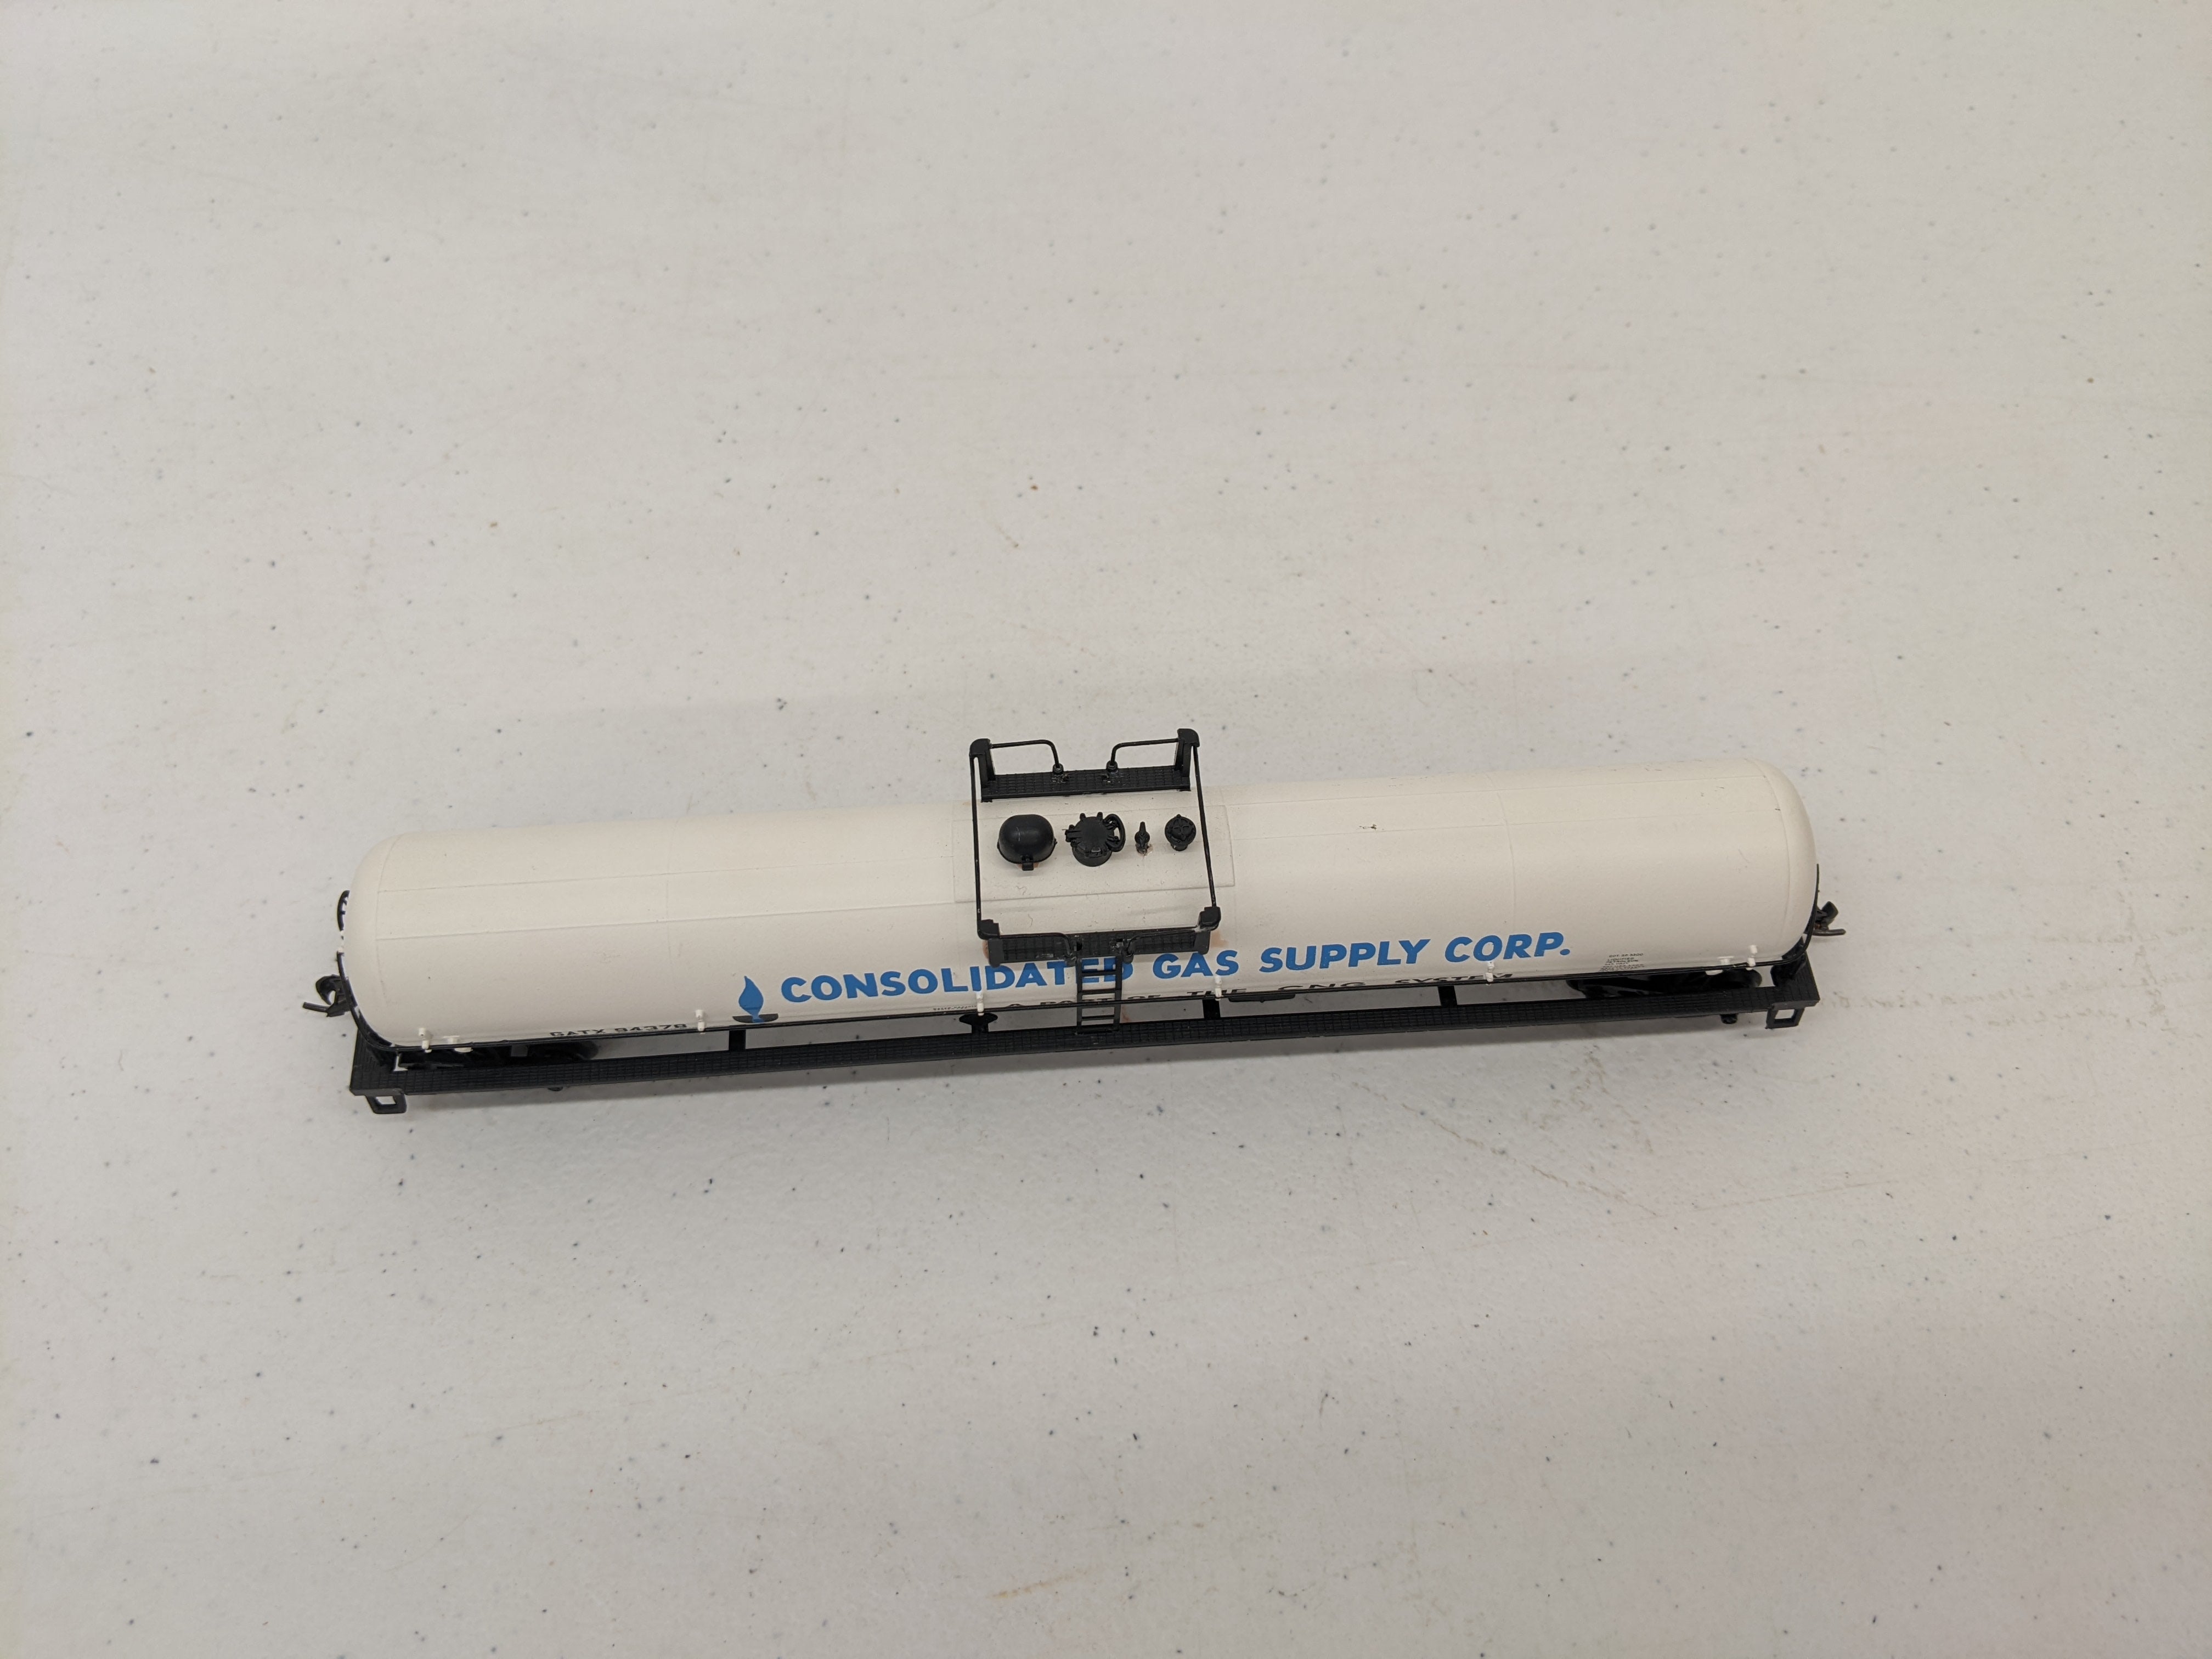 USED Athearn HO Scale, 60' Tank Car, Consolidated Gas Supply Corp., General American Marks (GATX Corporation) GATX #94378